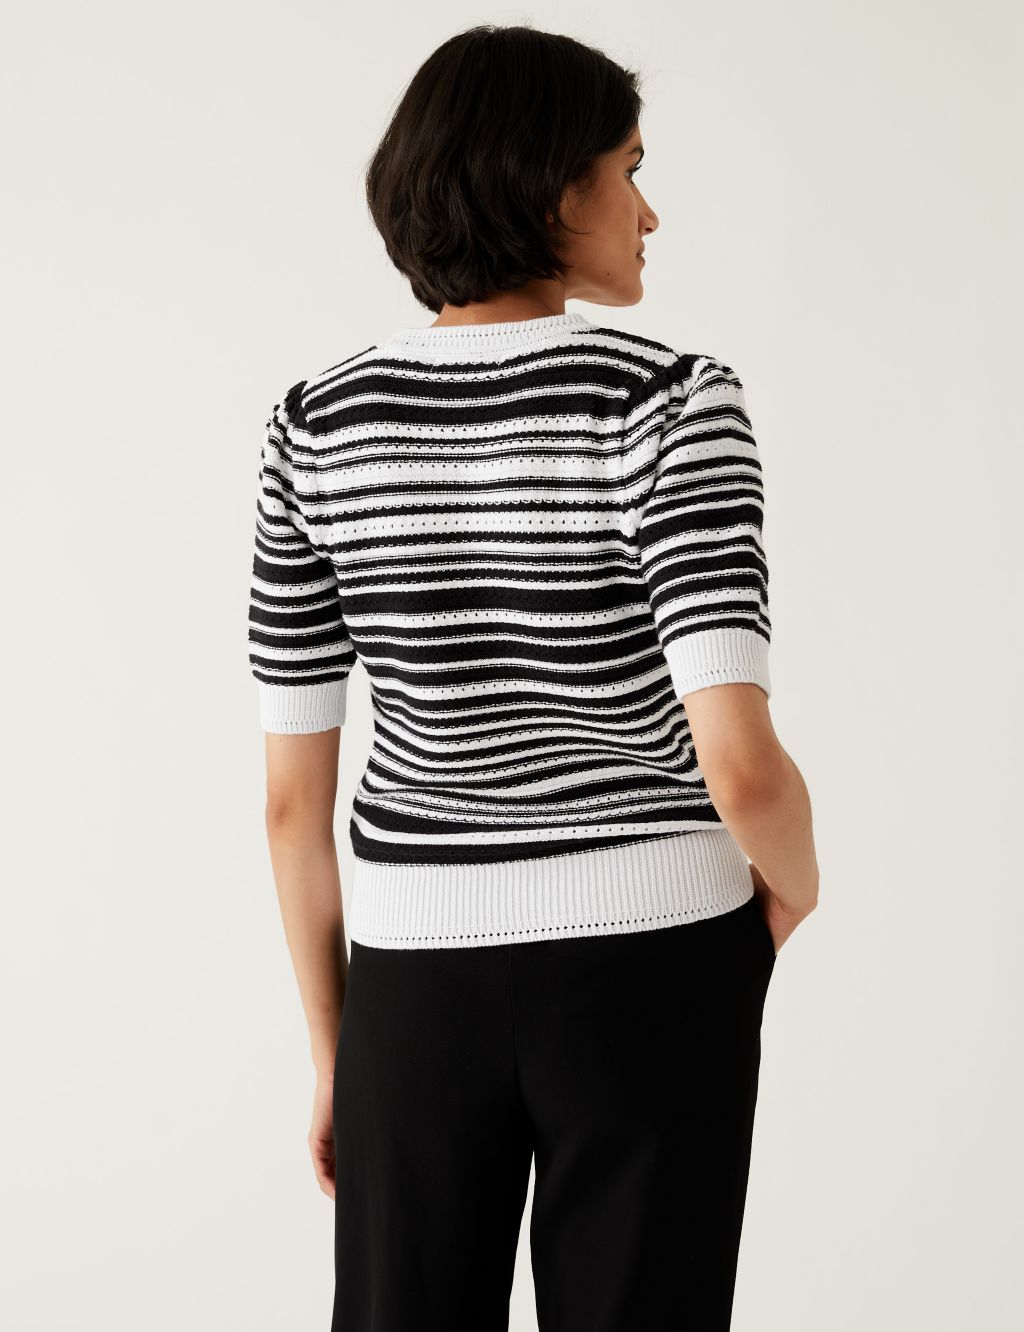 Cotton Rich Striped Crew Neck Knitted Top image 4